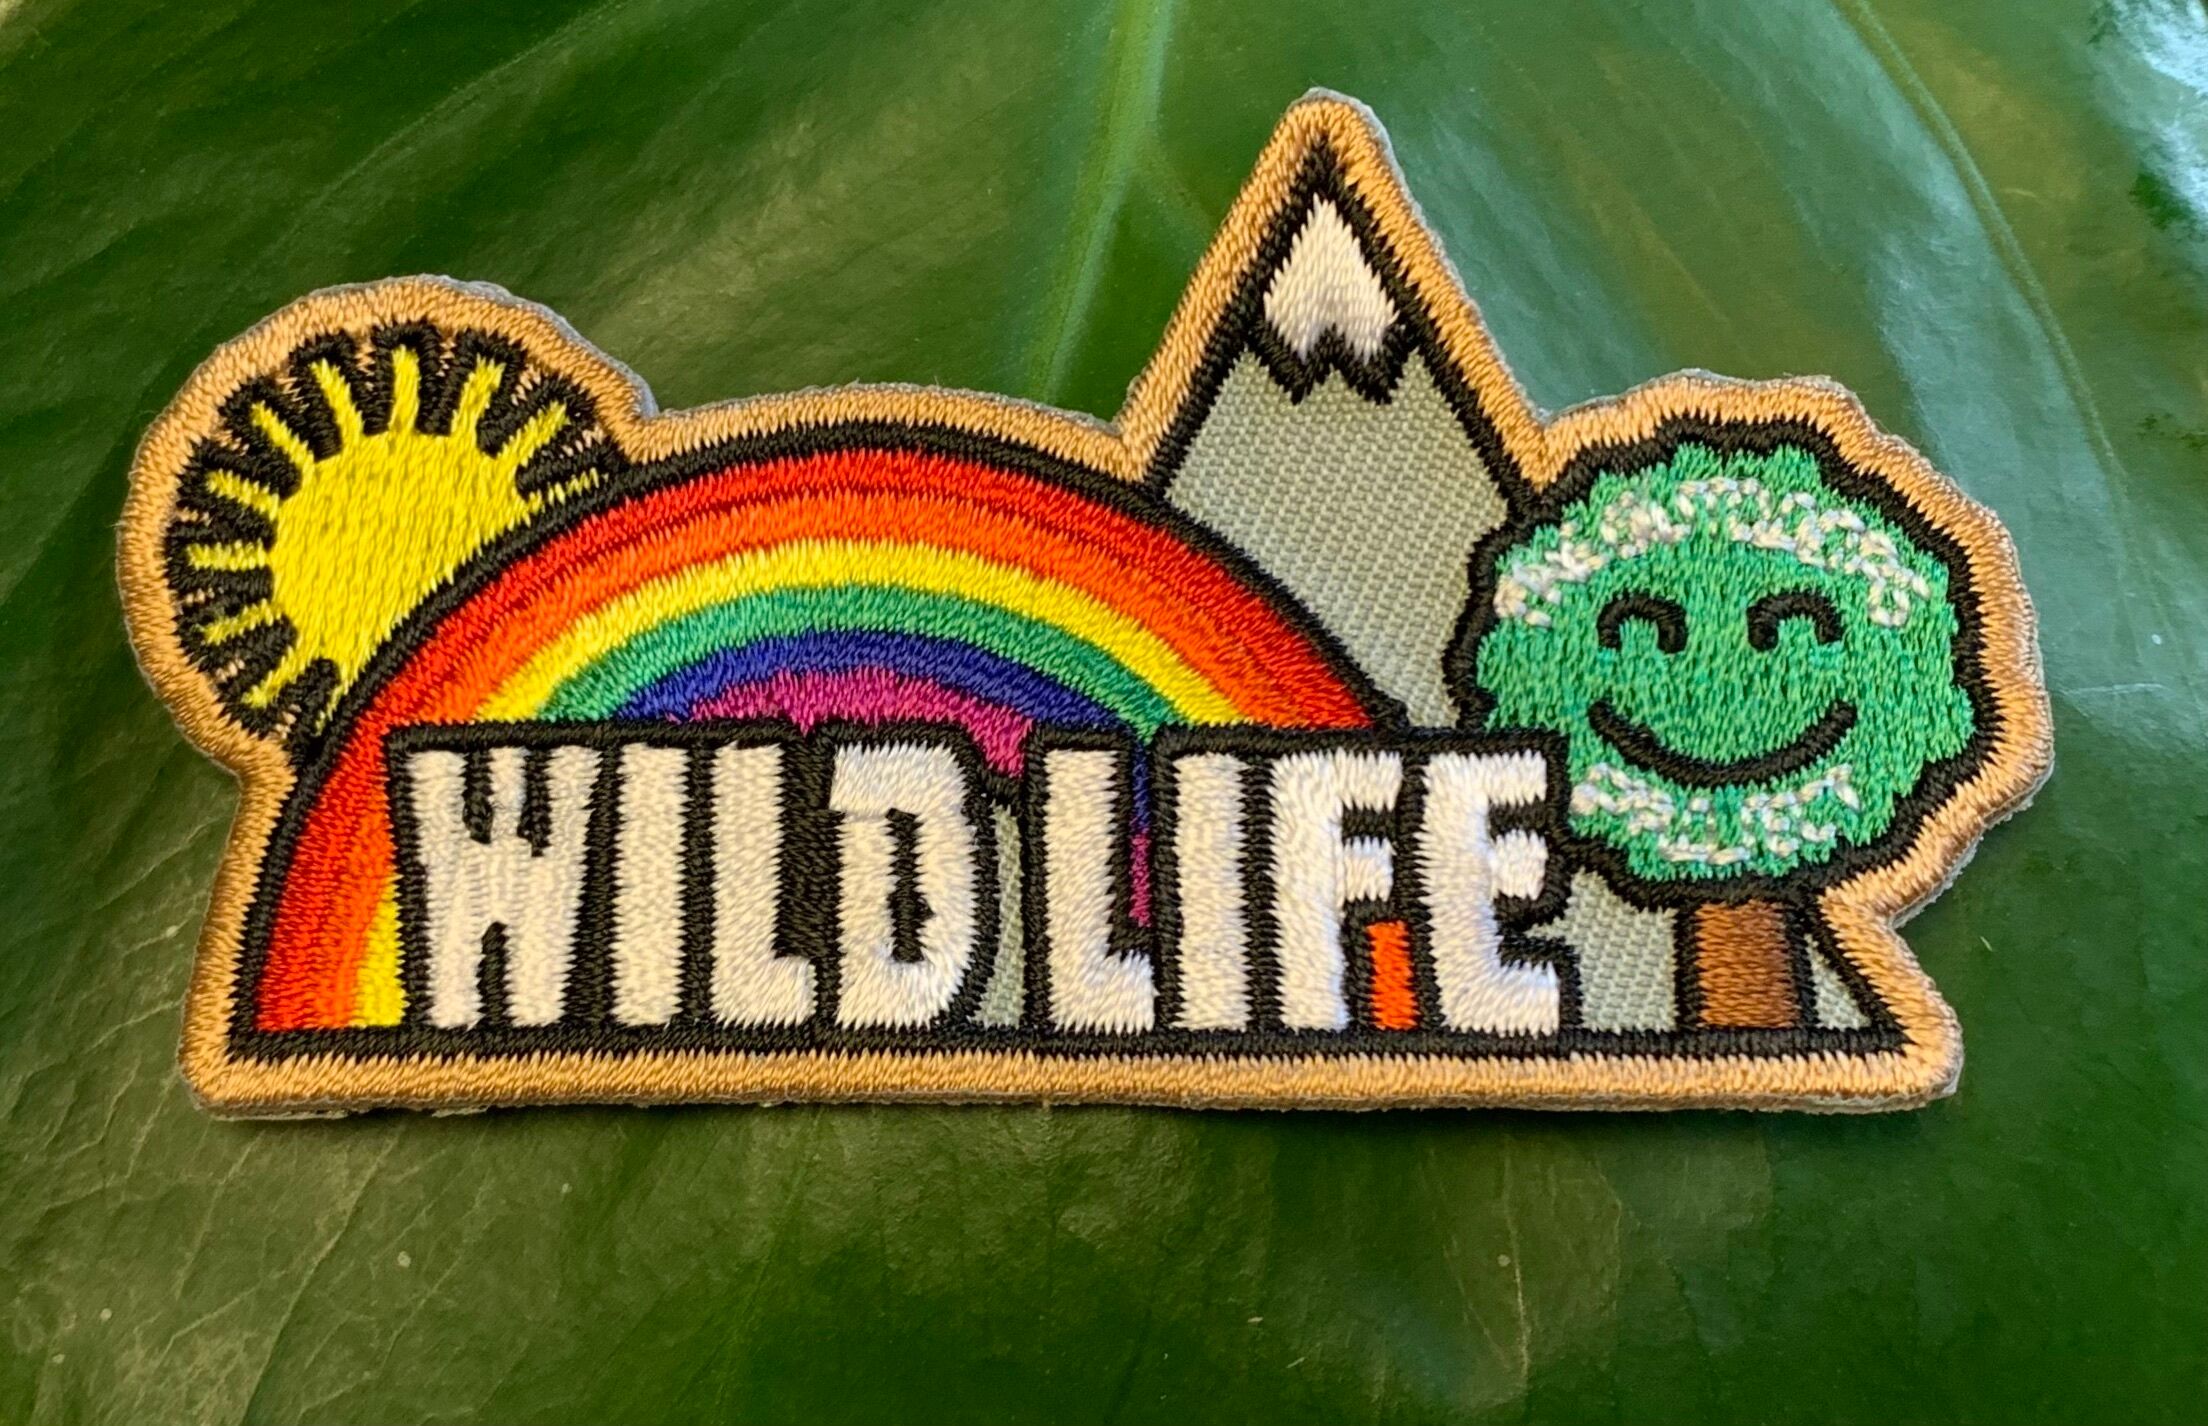 Design your own patch competition WINNER!